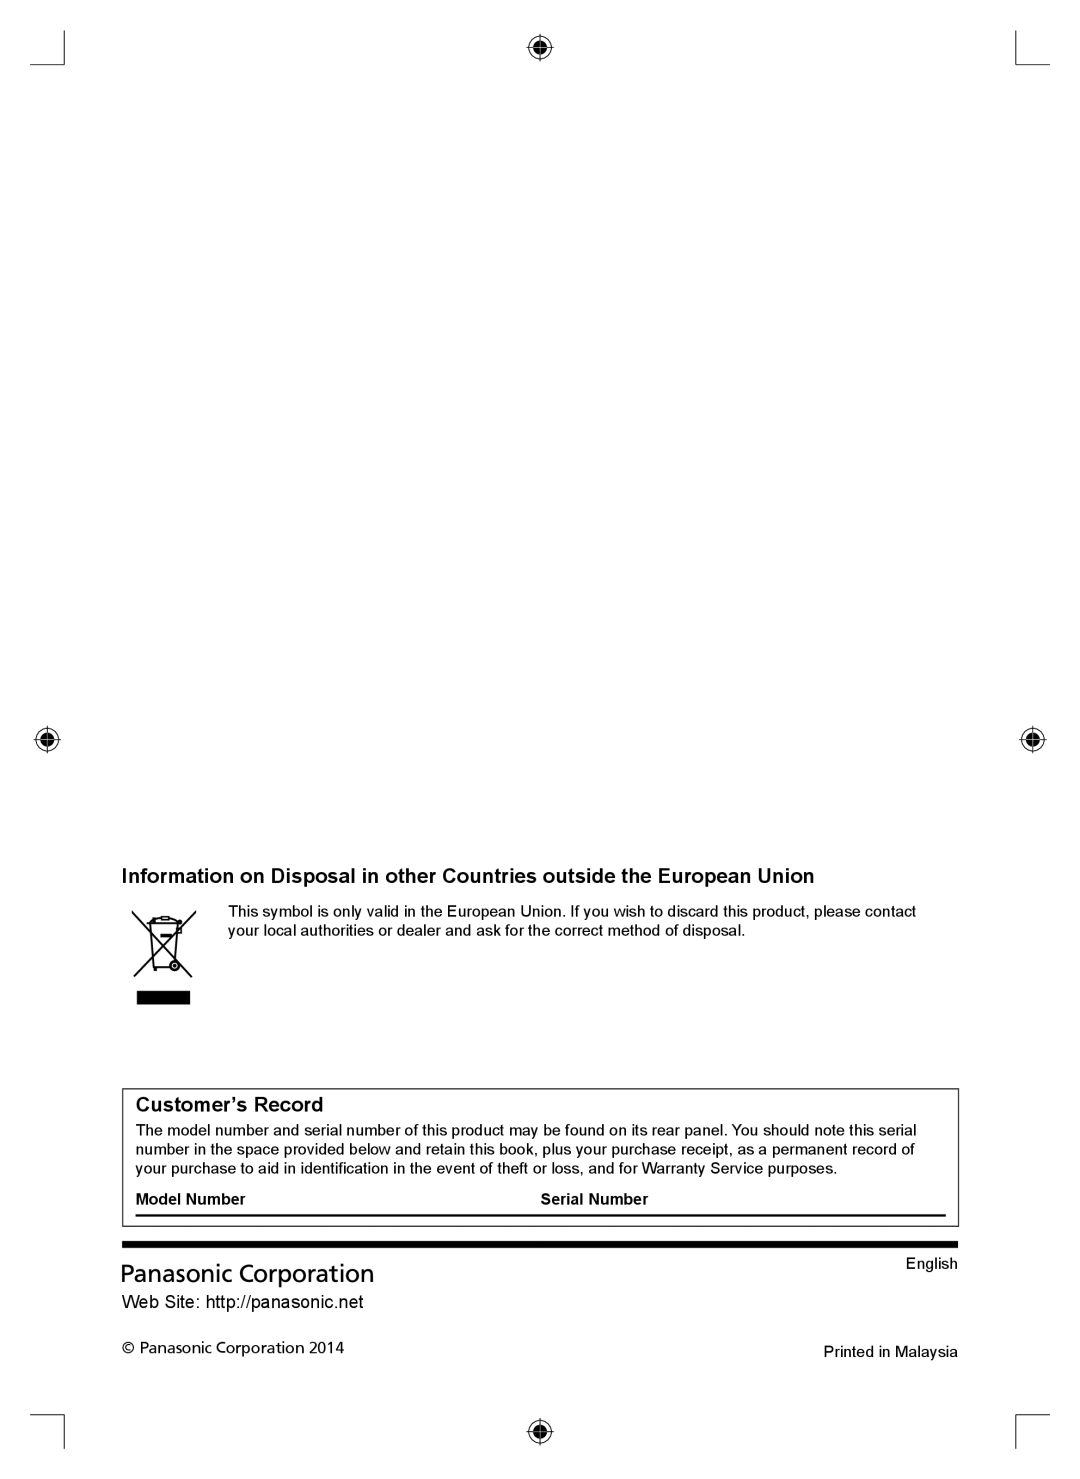 Panasonic TH-60A430G, TH-60A430K Information on Disposal in other Countries outside the European Union, Customer’s Record 